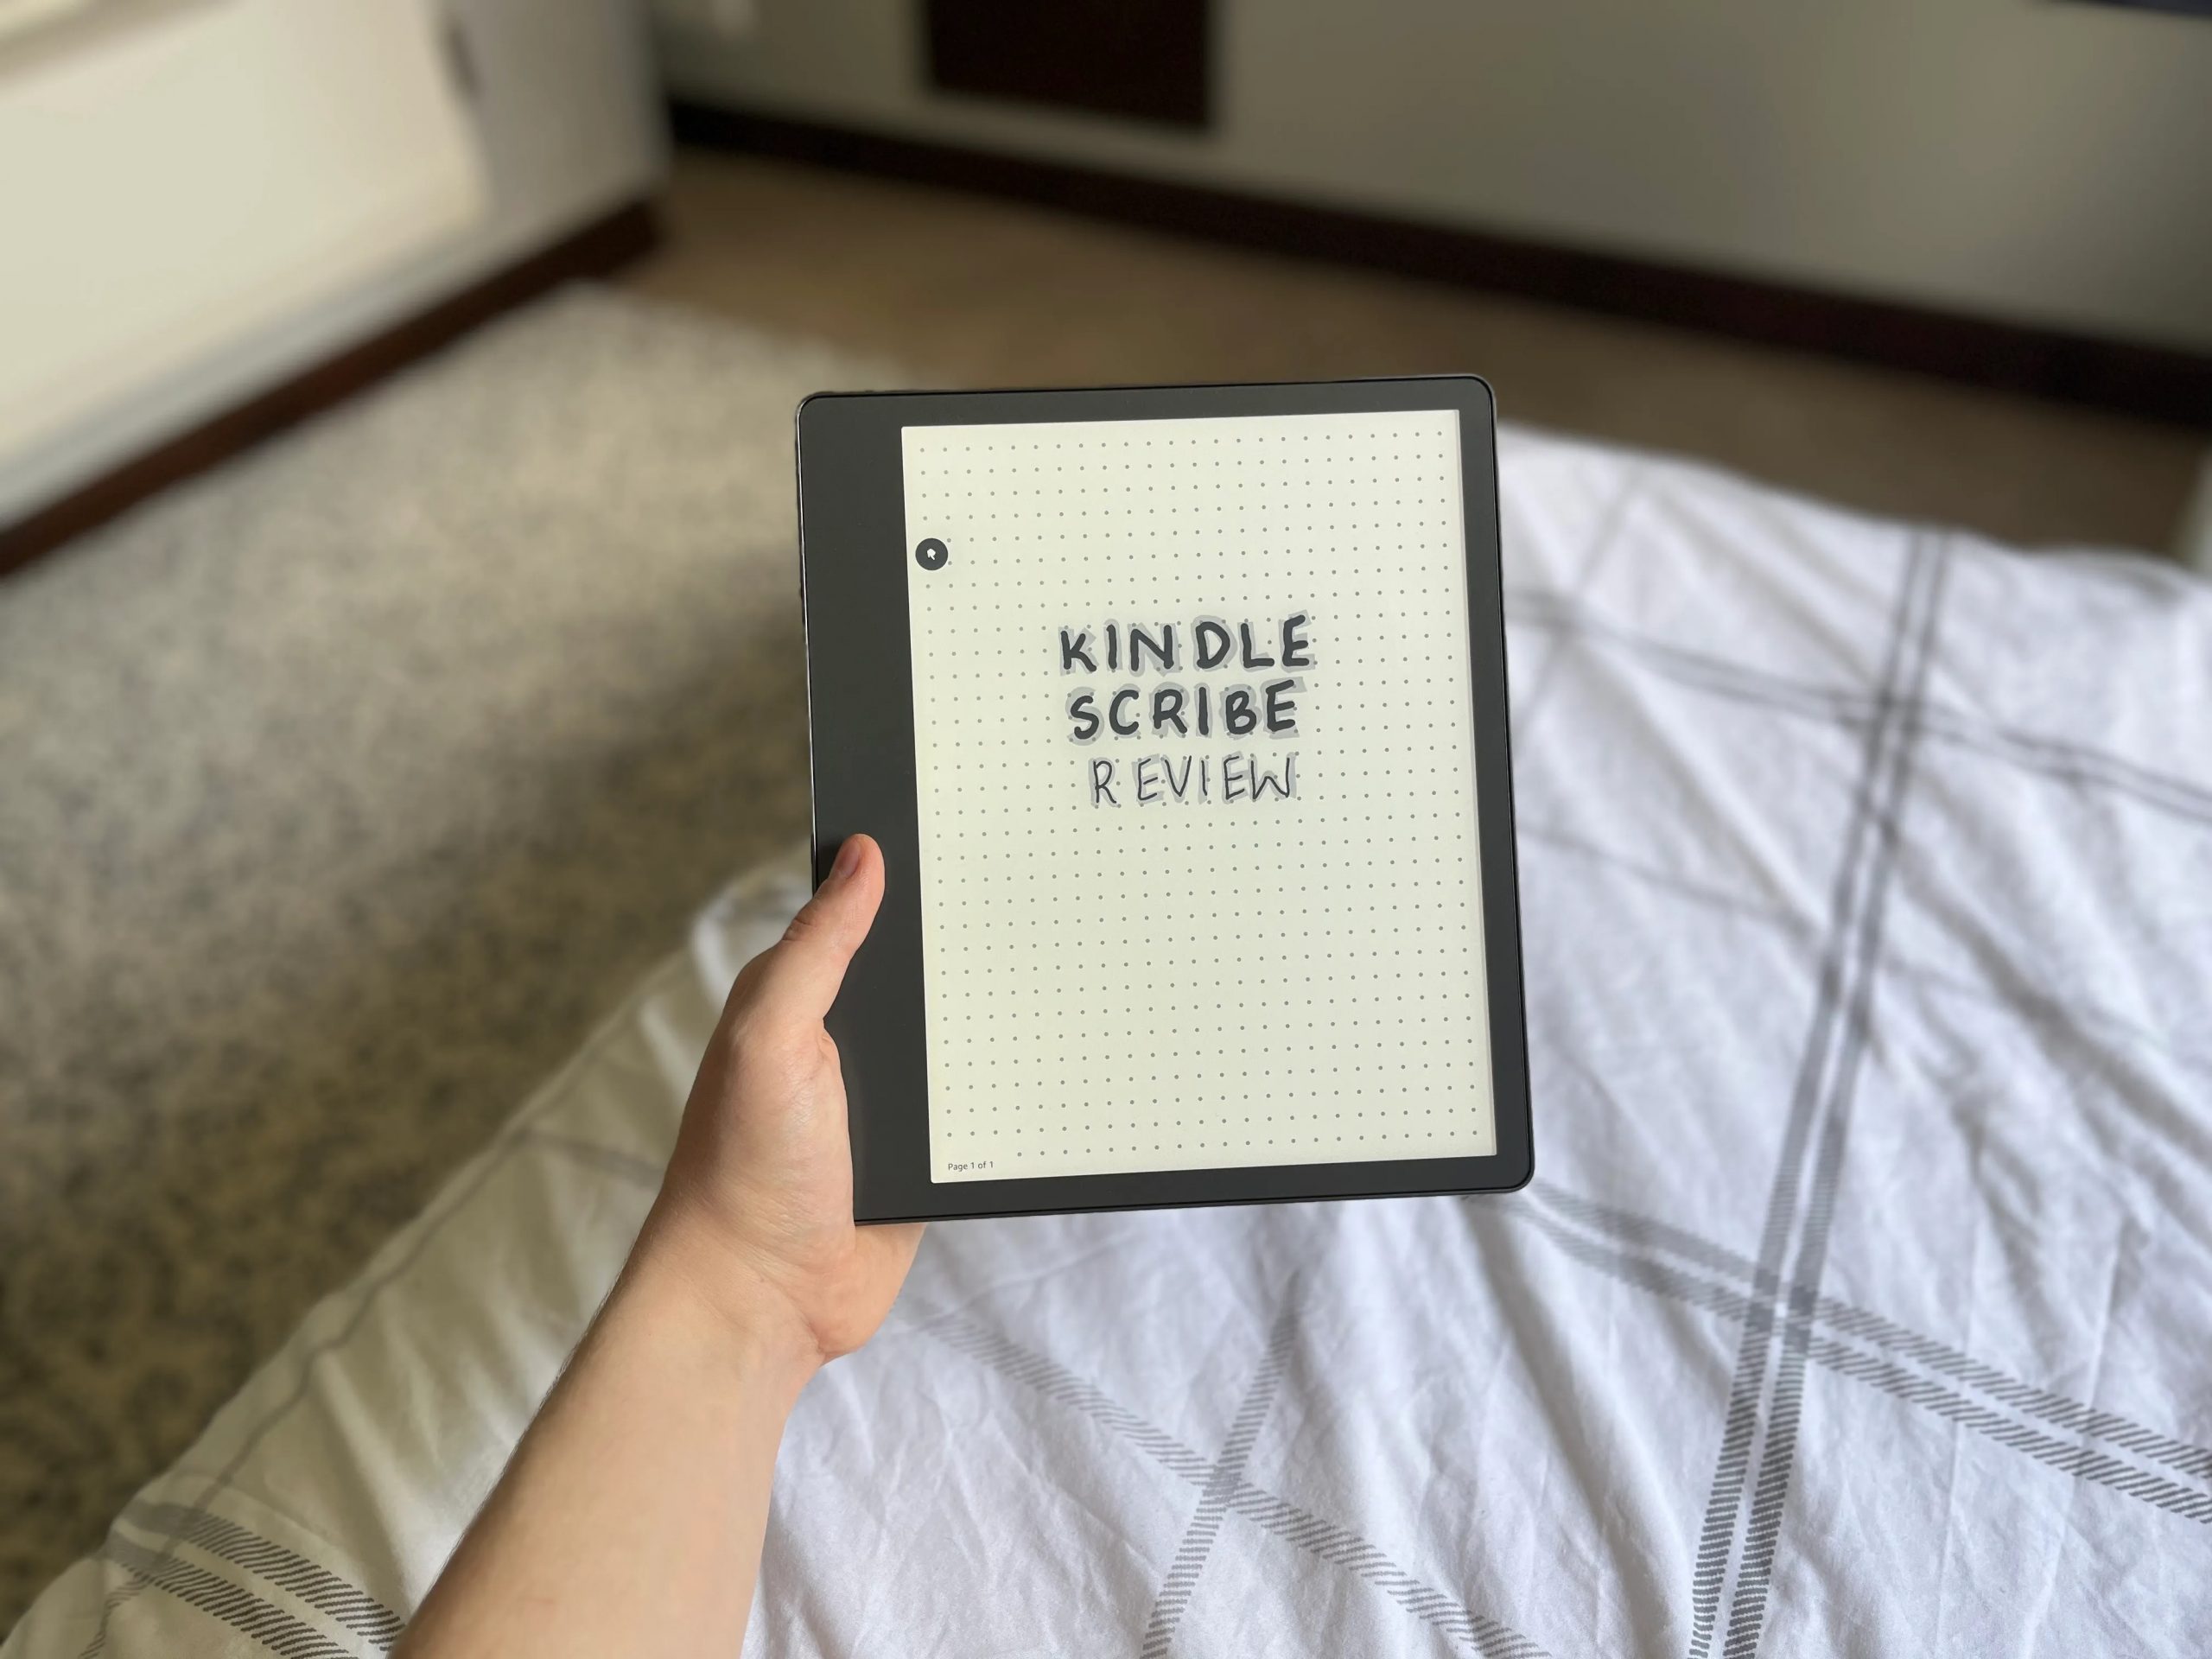 Kindle Scribe review: The most versatile e-reader yet